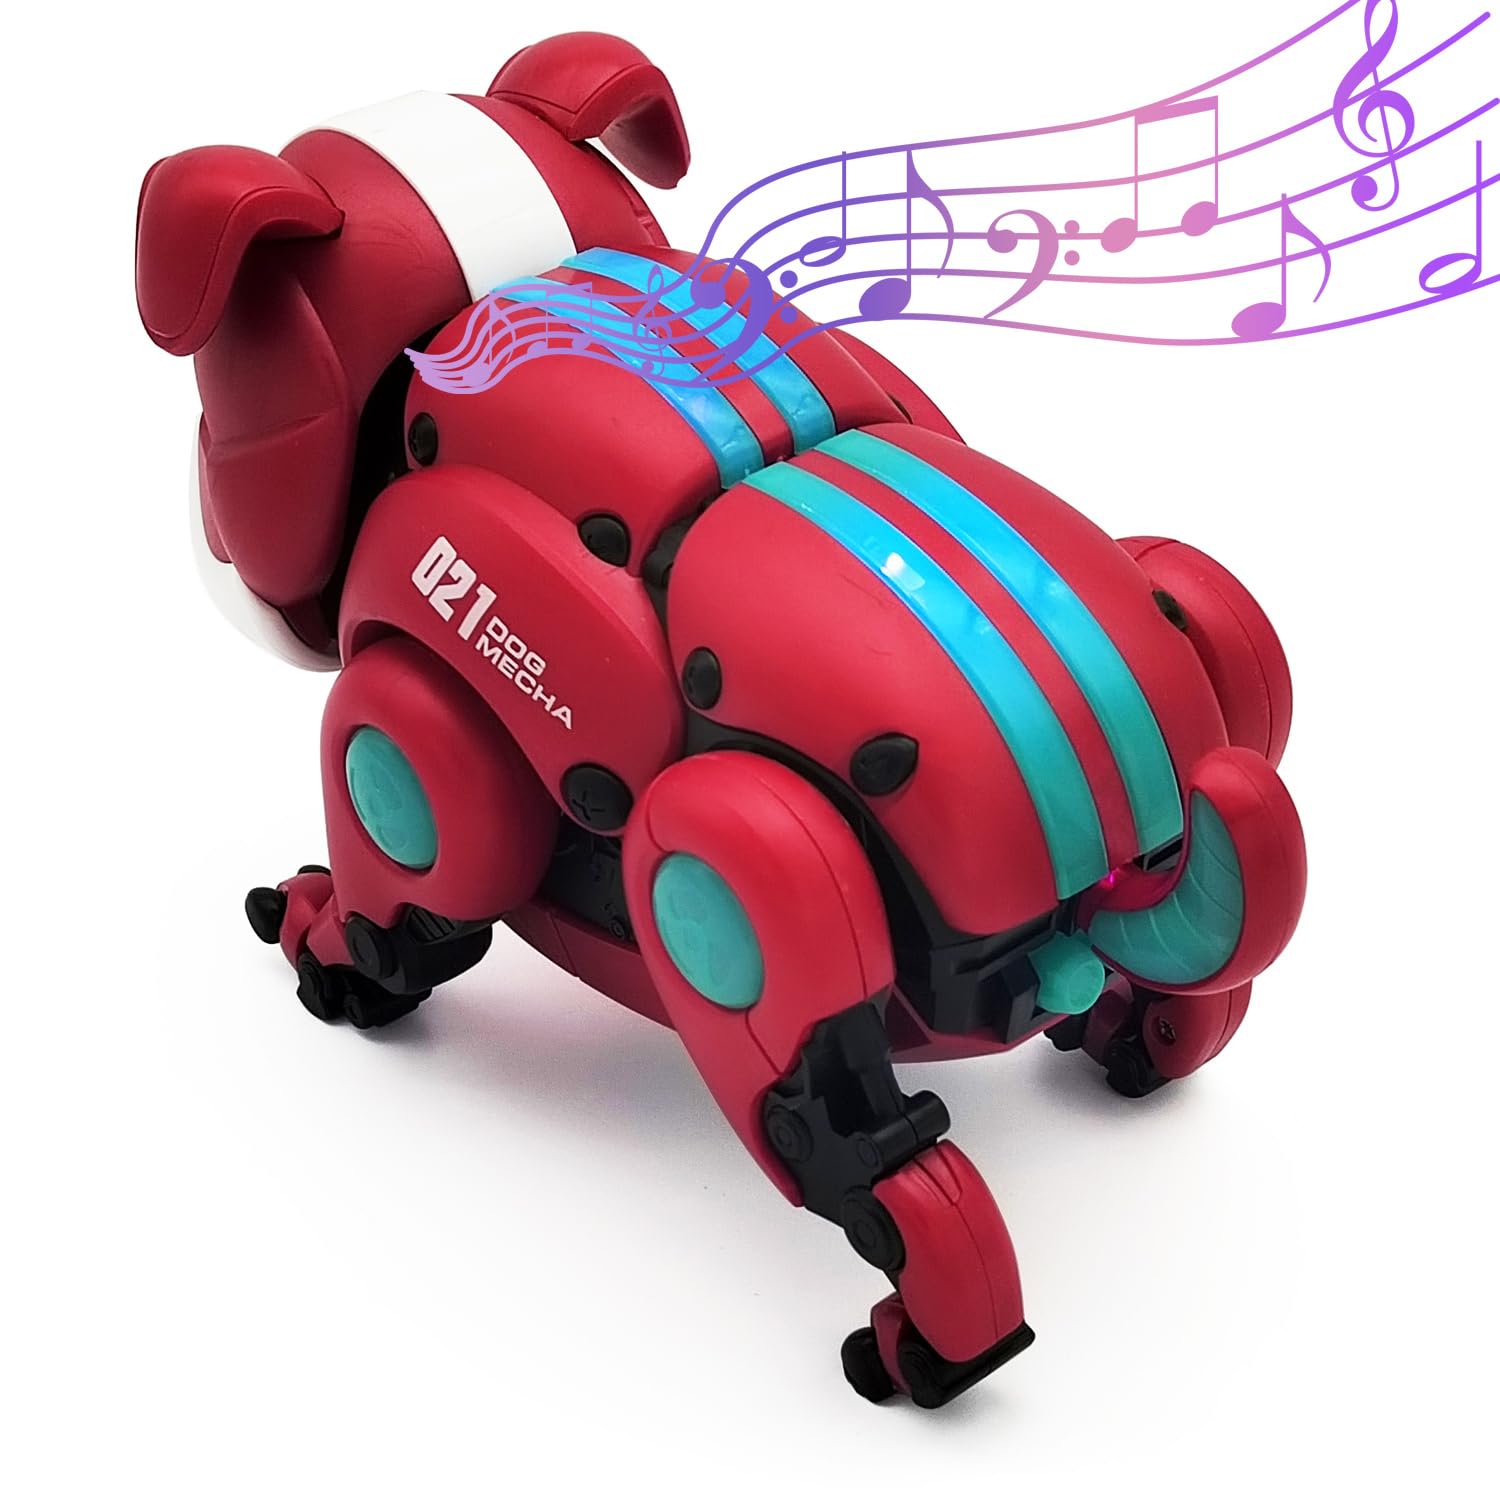 Tipmant Electric Puppy Toys Electronic Mechanical Dog Animal Robot Vehicle Walk, Music, Light Boys Girls Toddler Kids Birthday Gifts Battery & Charger Included